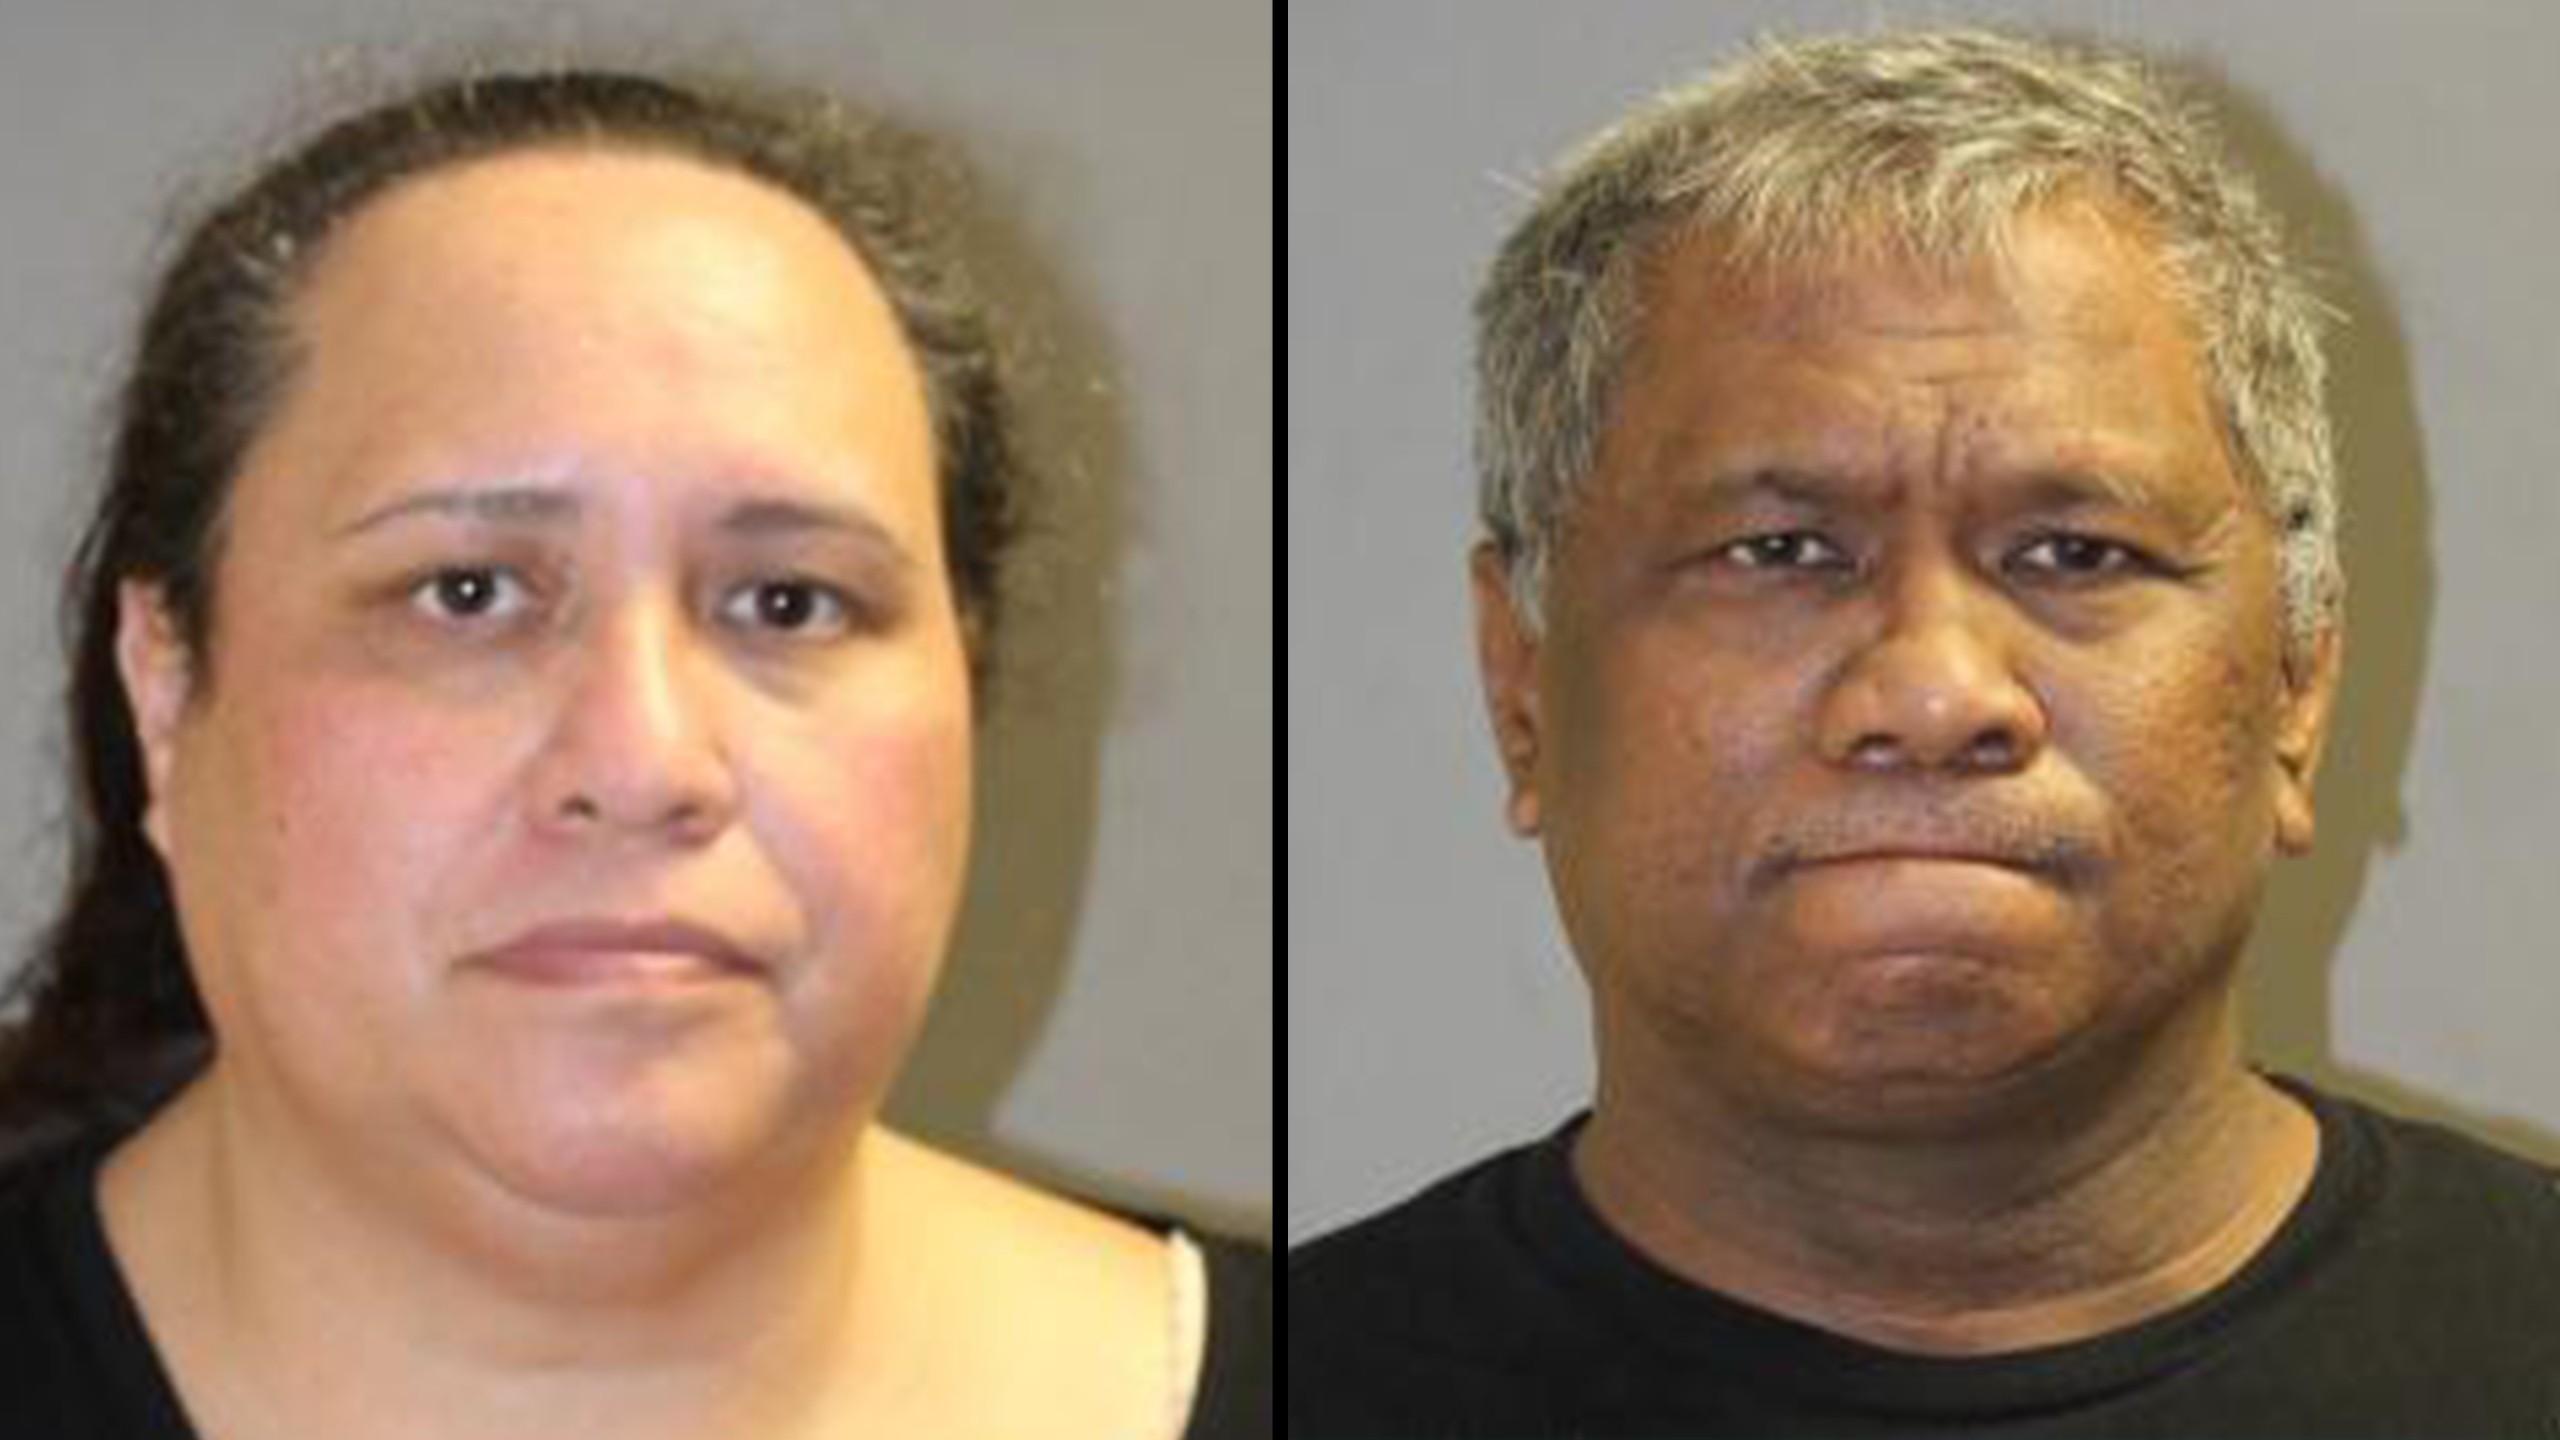 LEHUA AND ISAAC KALUA INDICTED FOR MURDER AND OTHER OFFENSES CONNECTED WITH DISAPPEARANCE OF ISABELLA “ARIEL” KALUA